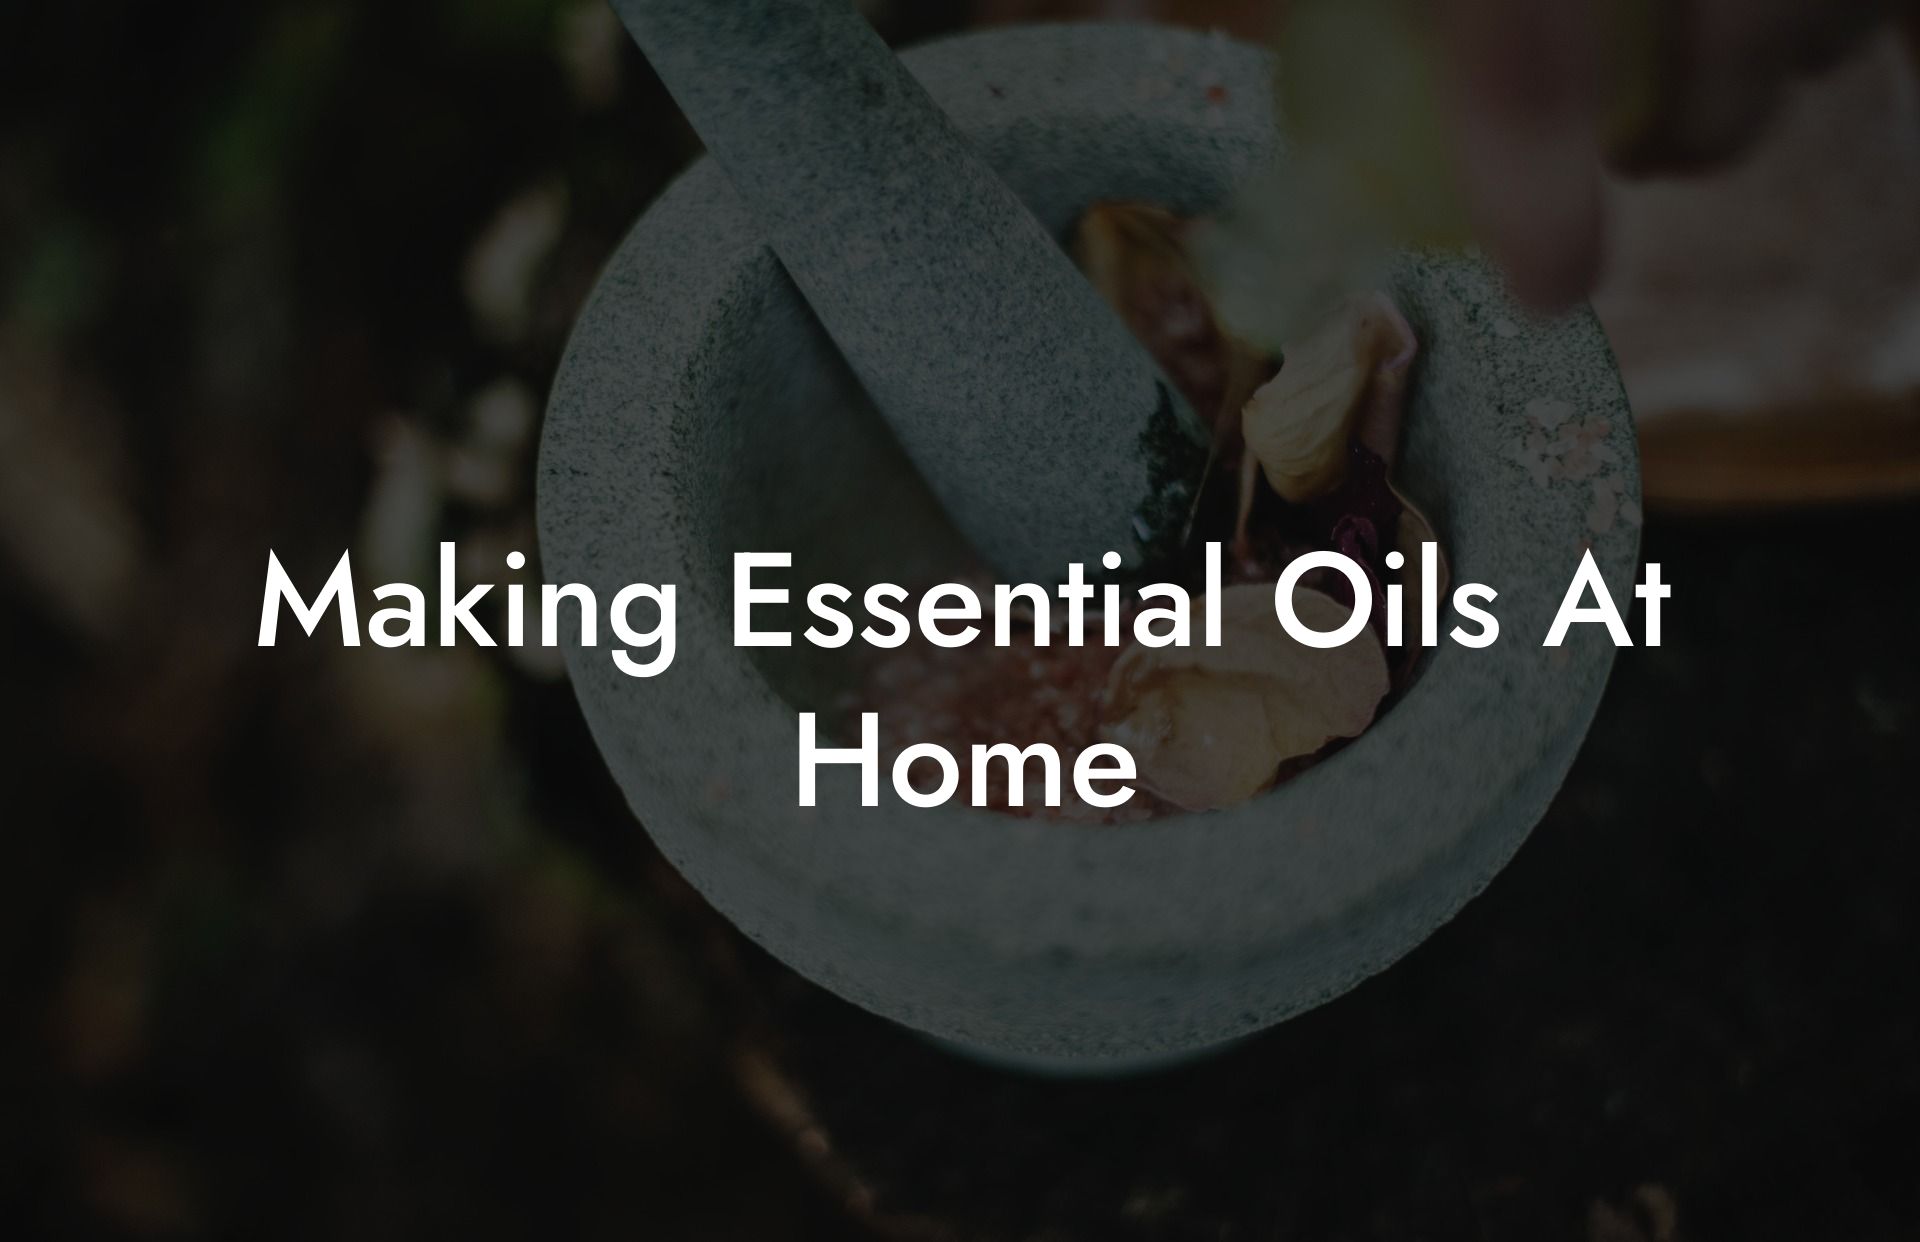 Making Essential Oils At Home